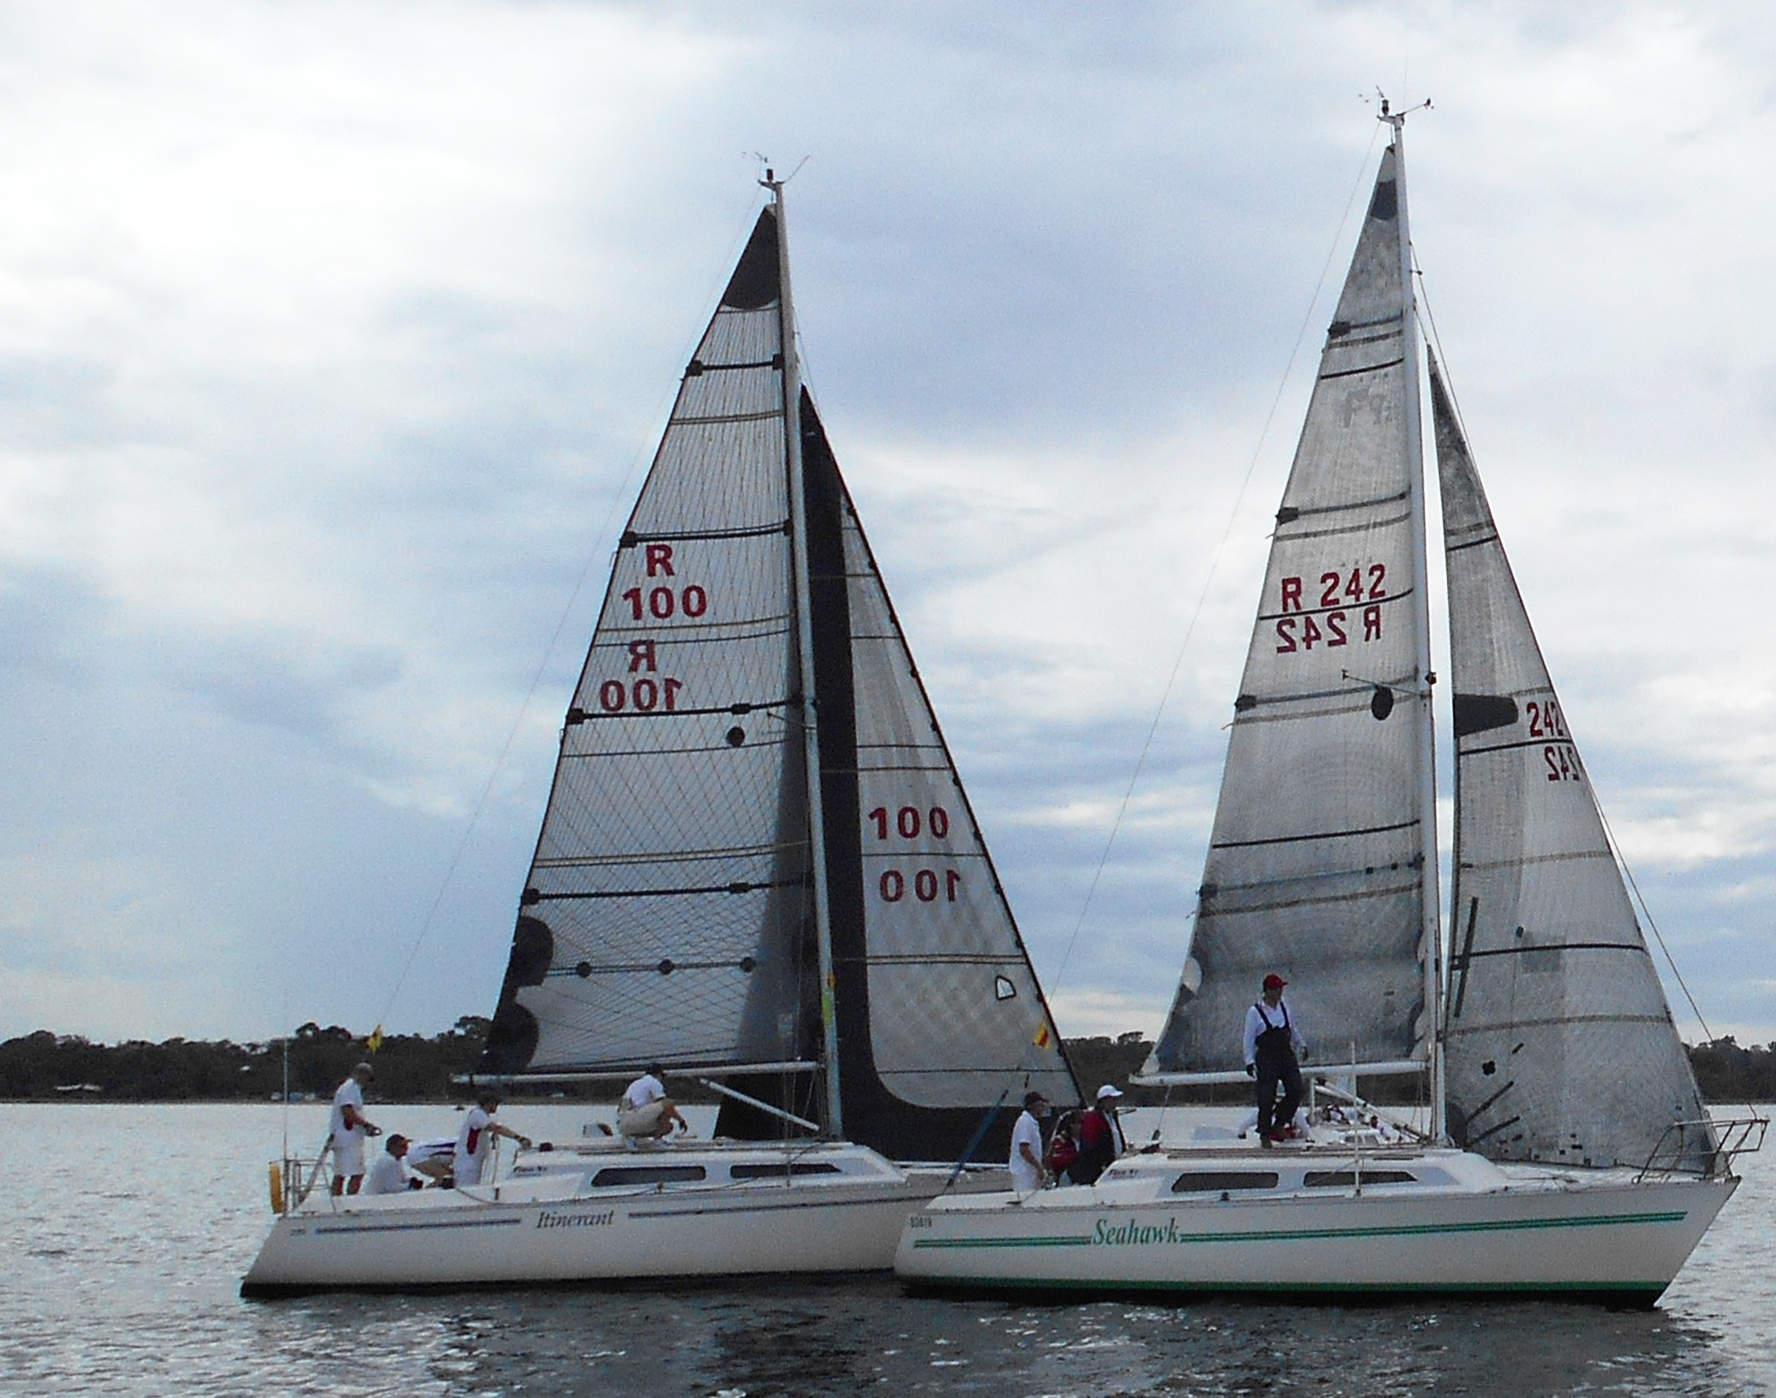 Mark Hansen's ITINERANT sailing with second place finisher SEAHAWK.